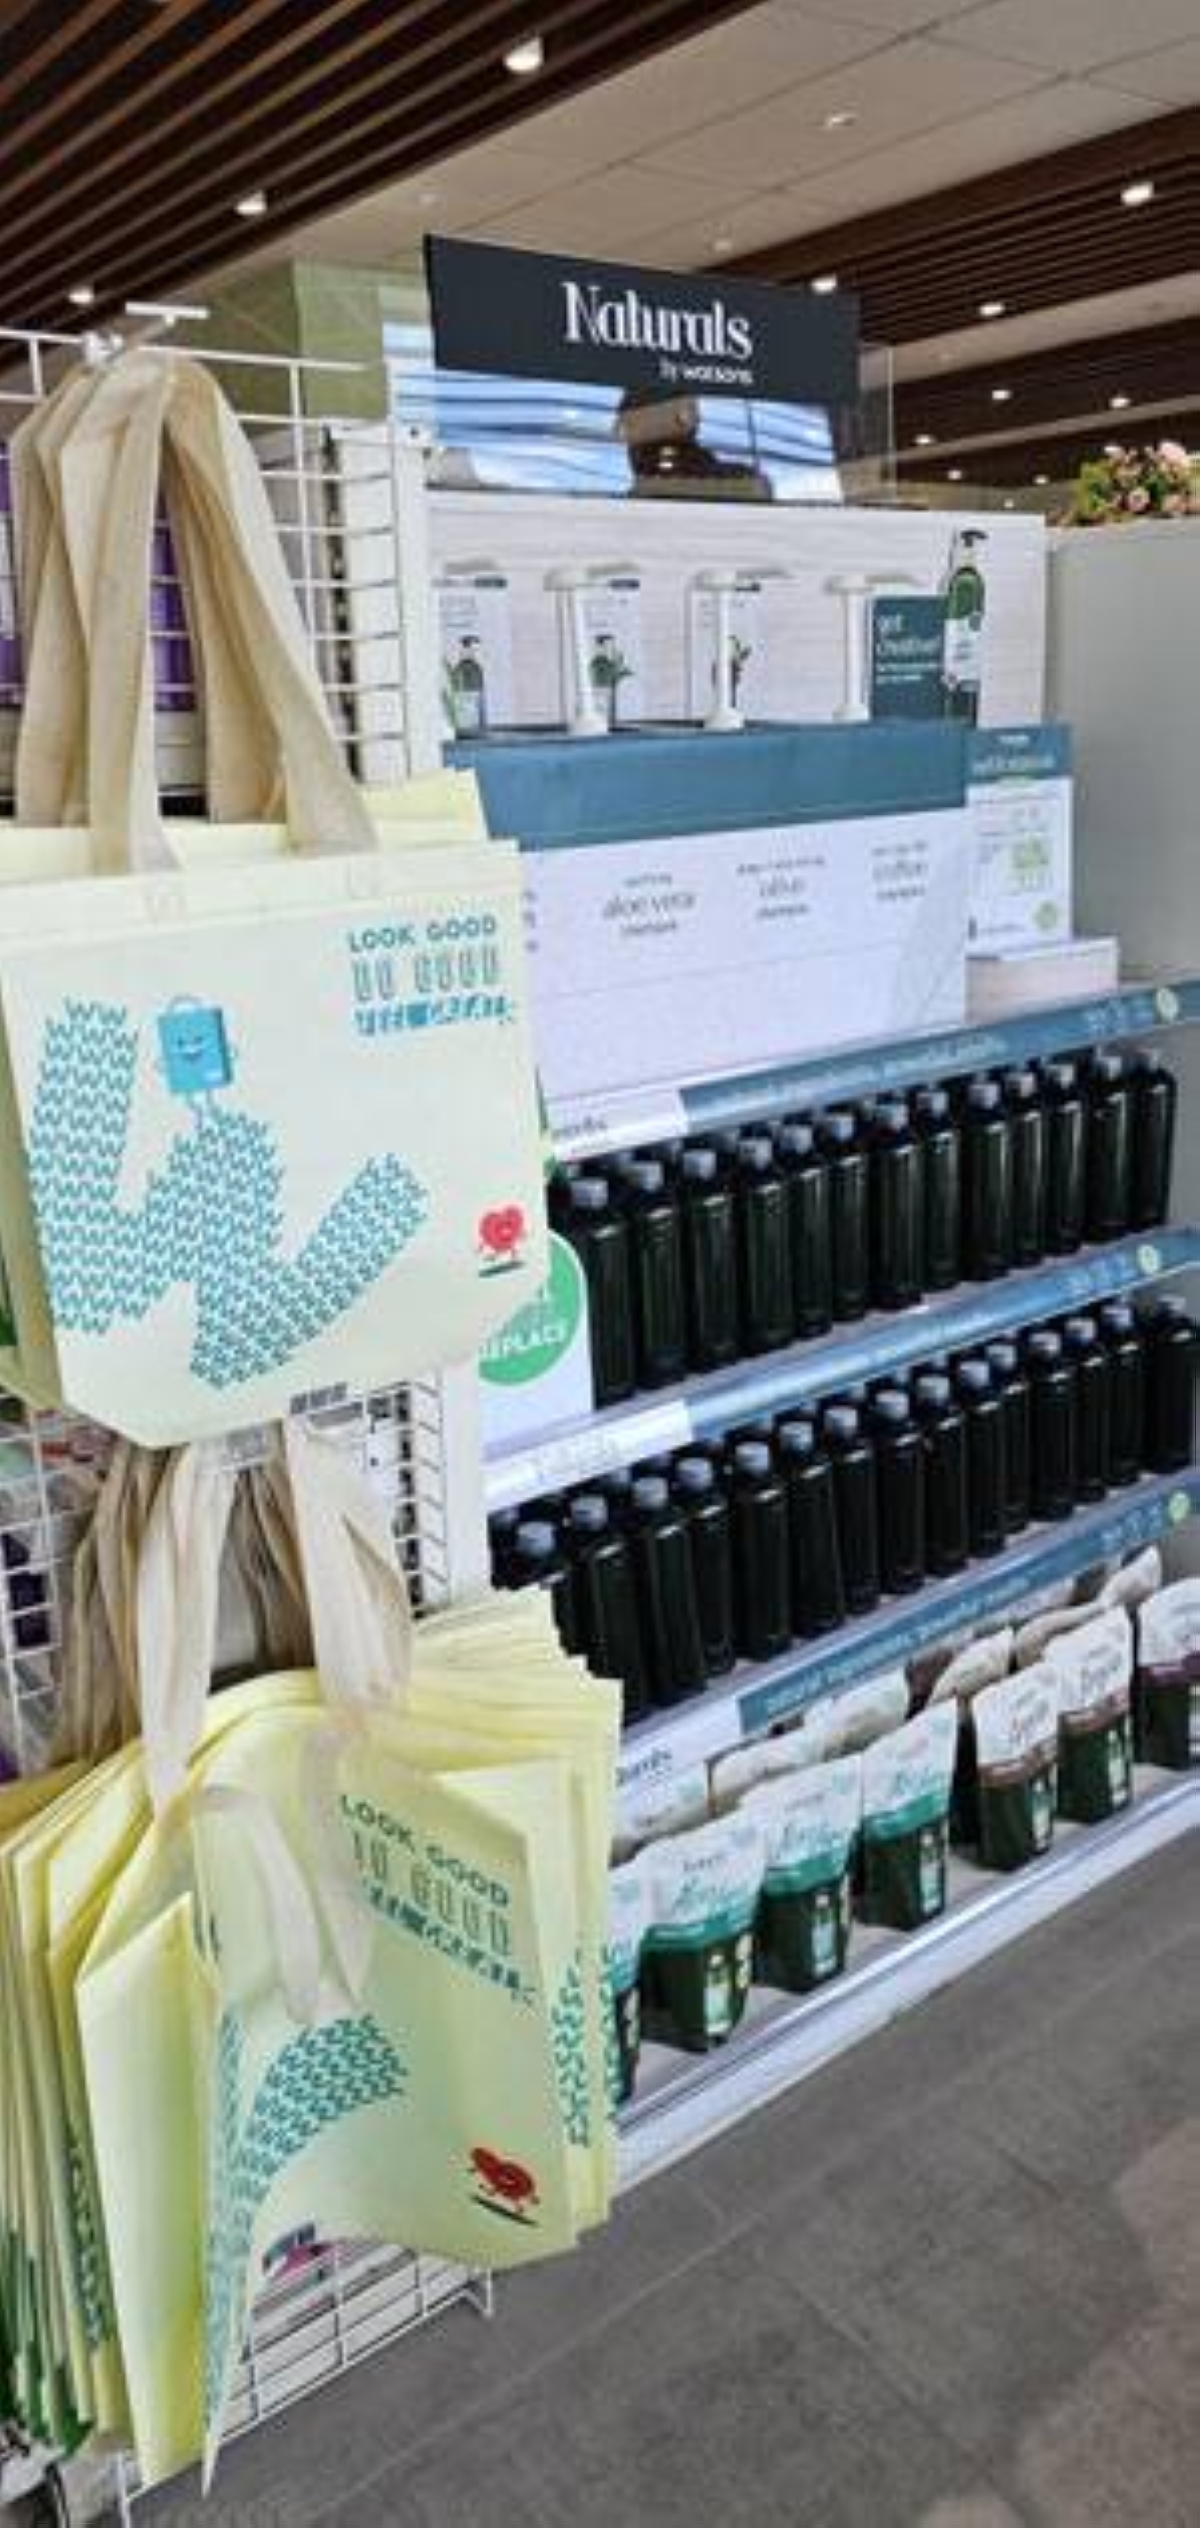 The Greener Store encourages customers to bring reusable shopping bags and practice refilling to promote waste reduction, segregation and recycling.